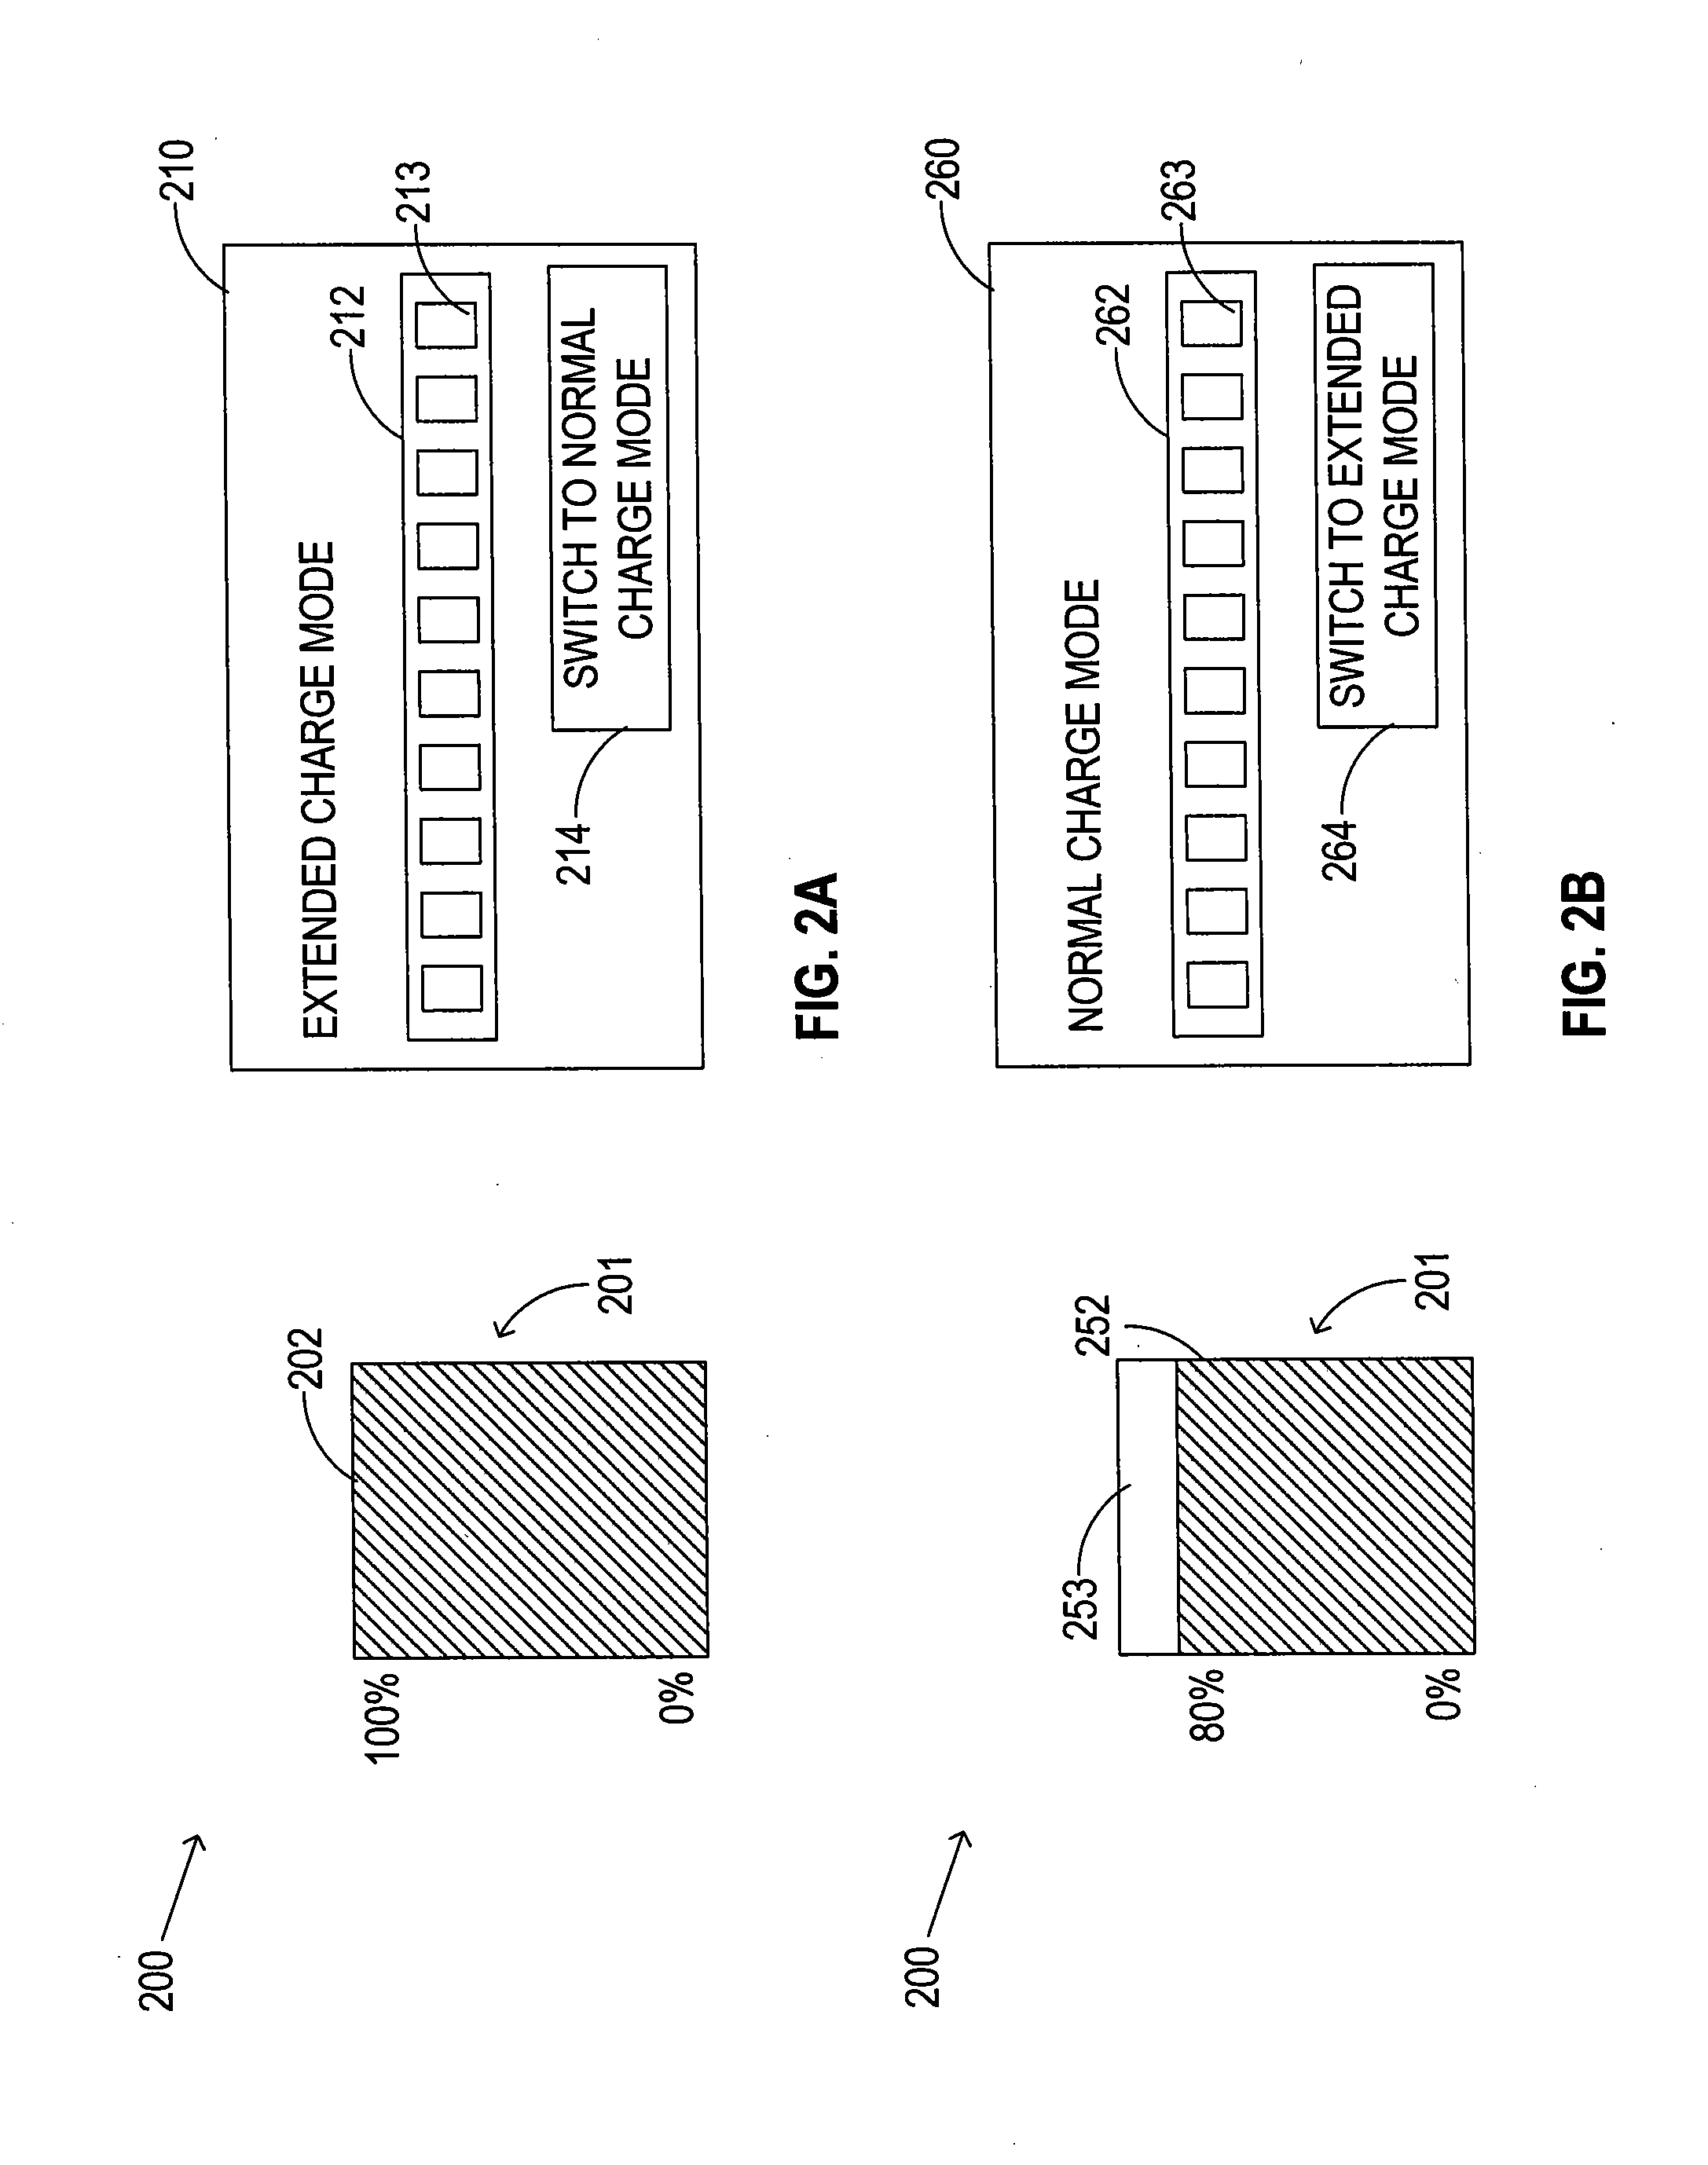 System and method for charge notice or charge mode in a vehicle